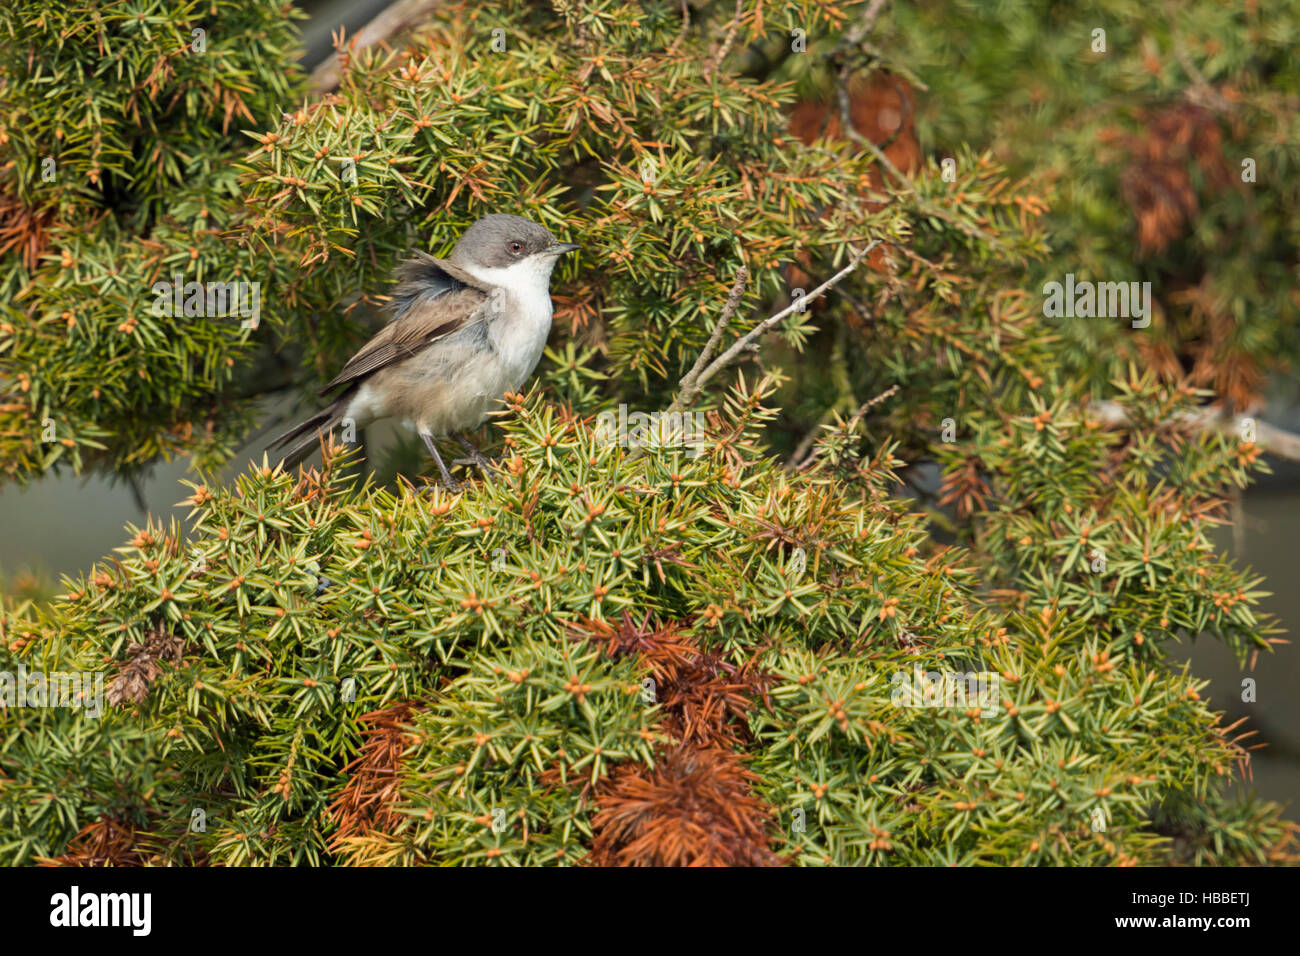 Lesser Whitethroat / Klappergrasmücke ( Sylvia curruca ), male bird, sitting on branches in a genister shrub, in typical environment. Stock Photo